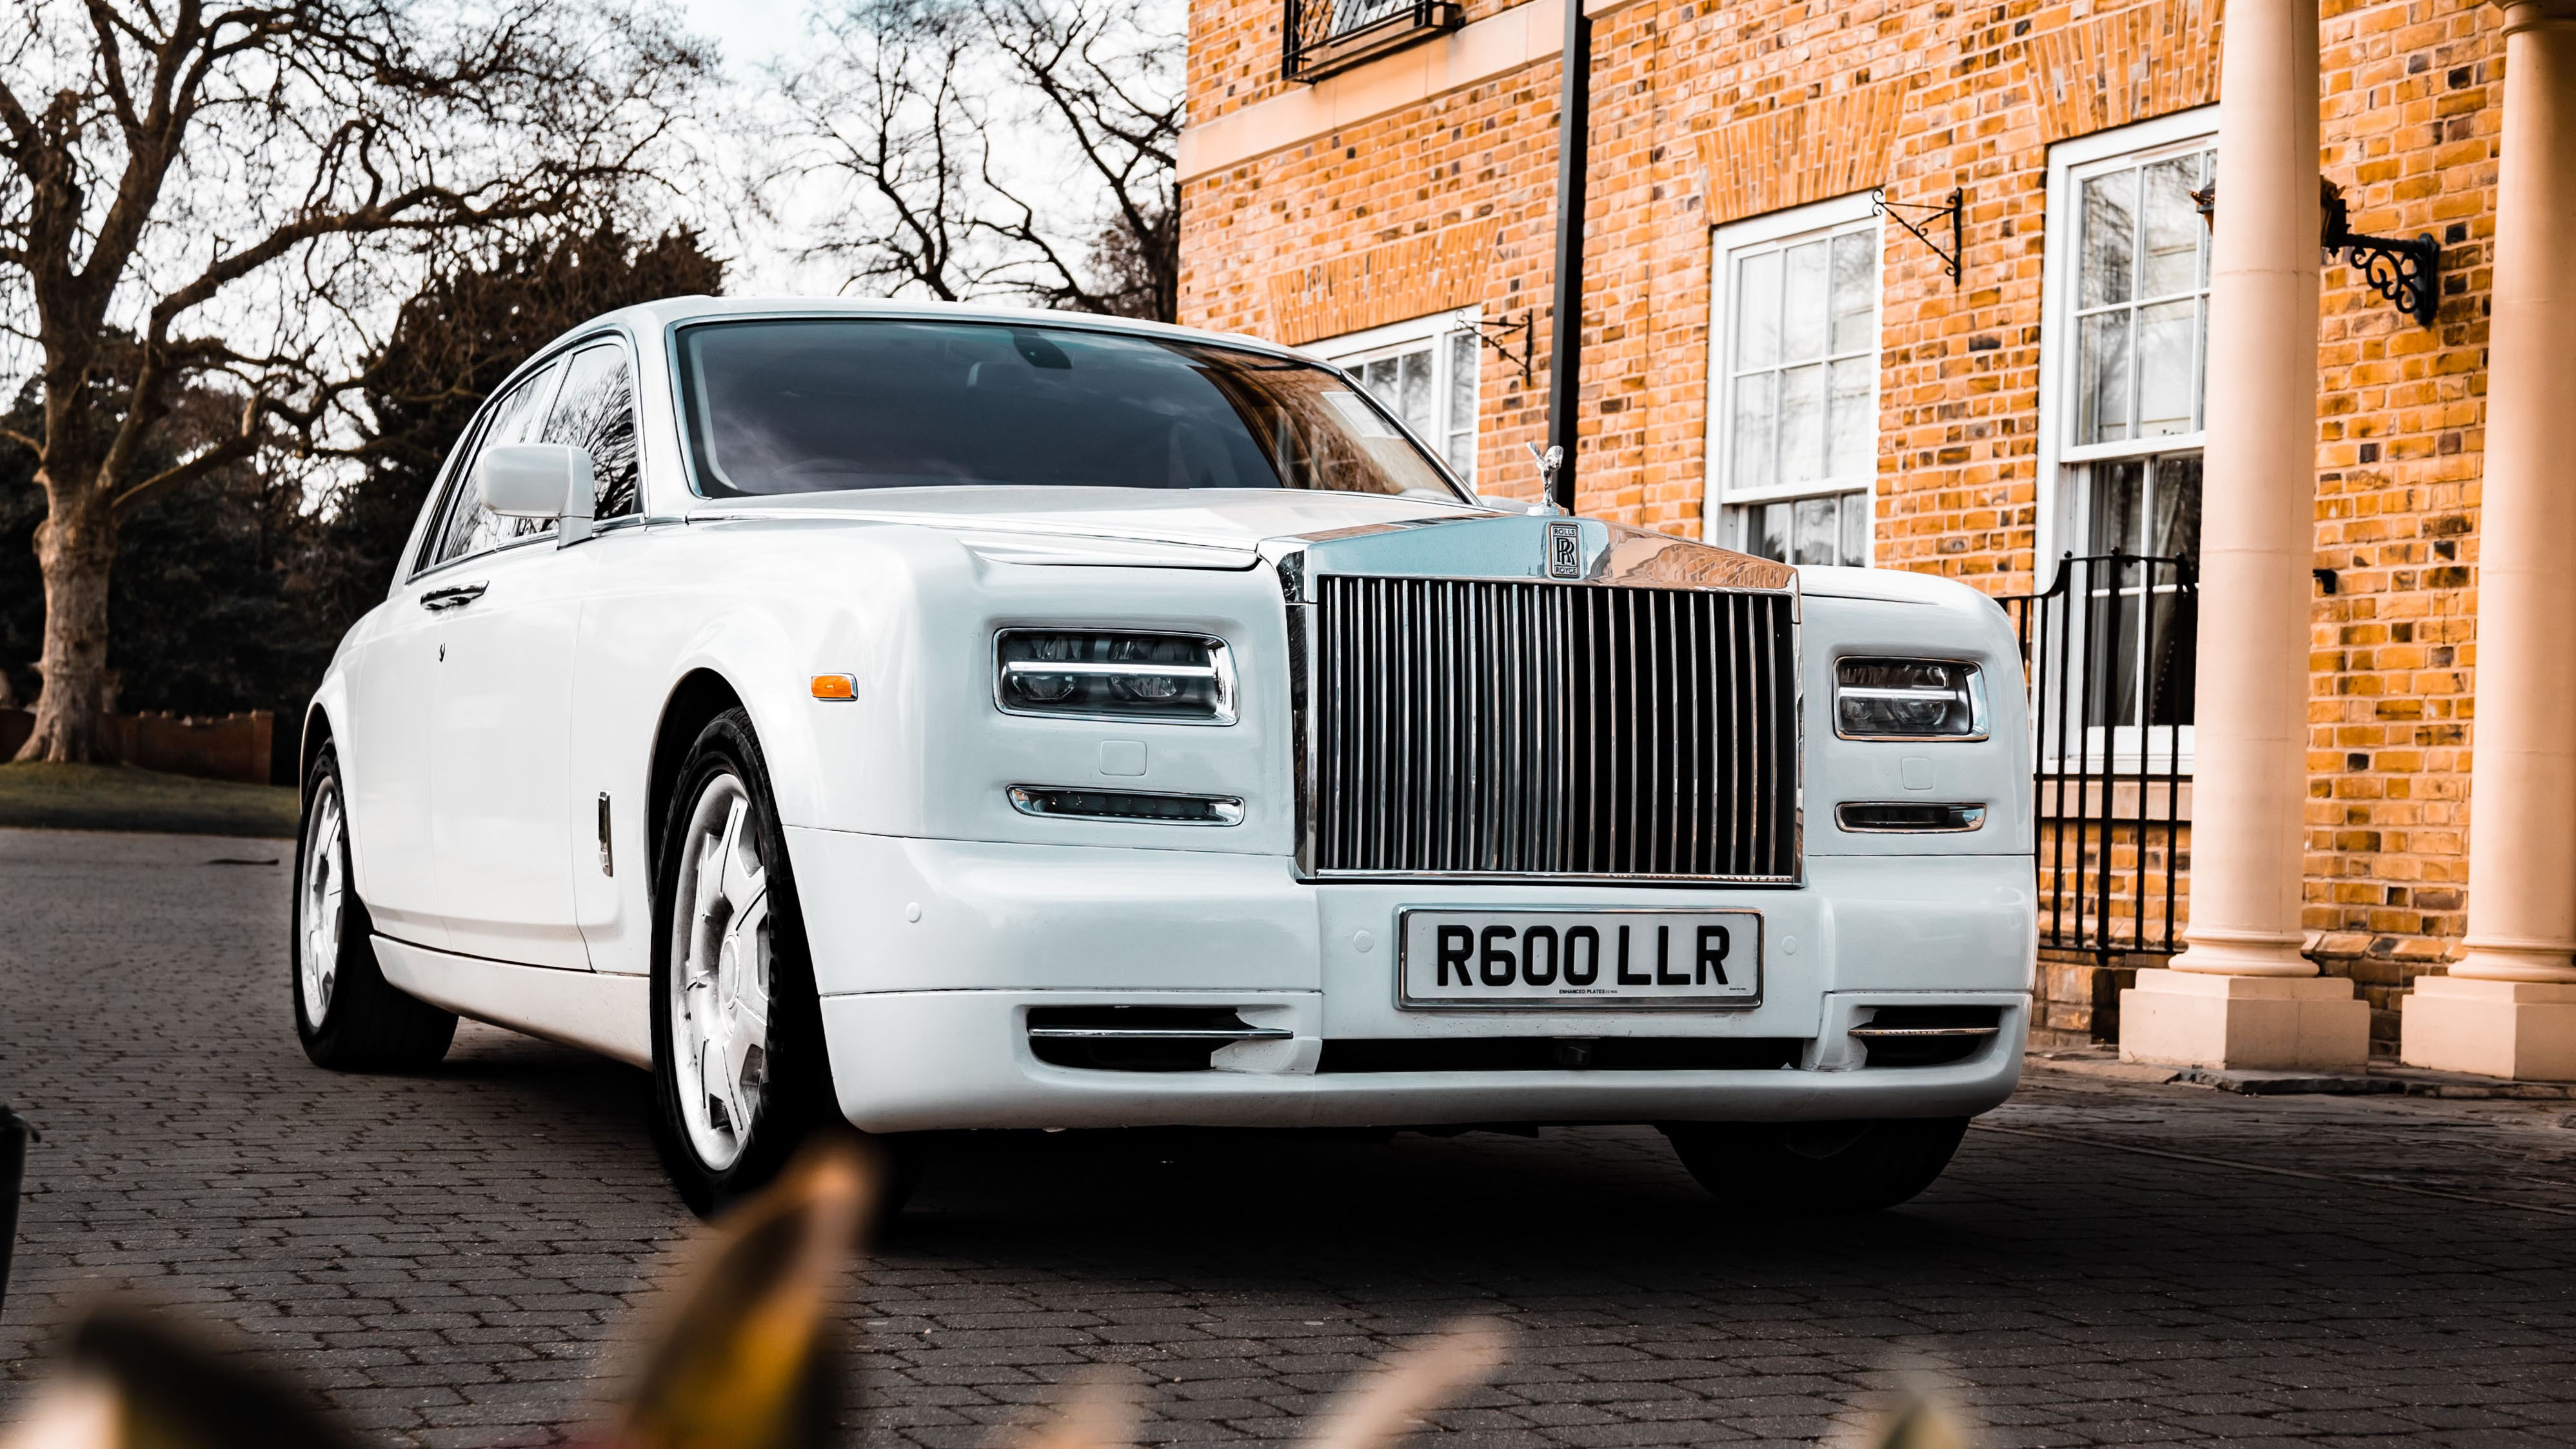 Modern white Rolls-Royce Phantom with its large chrome alloy wheels and iconic chrome front grill in attendance at a popular wedding venue in Basildon in Essex.